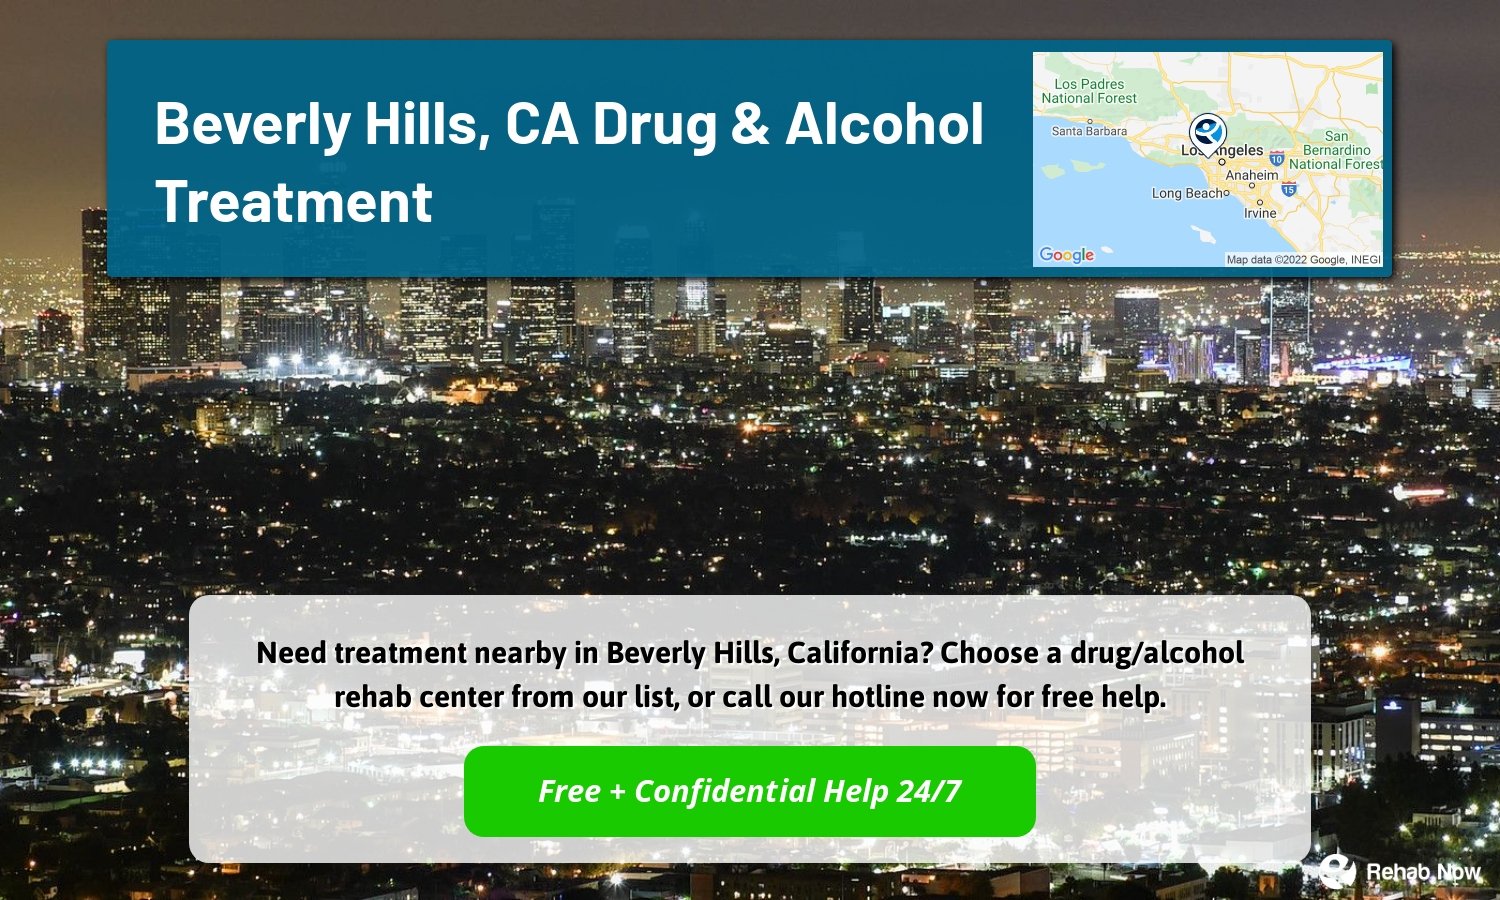 Need treatment nearby in Beverly Hills, California? Choose a drug/alcohol rehab center from our list, or call our hotline now for free help.